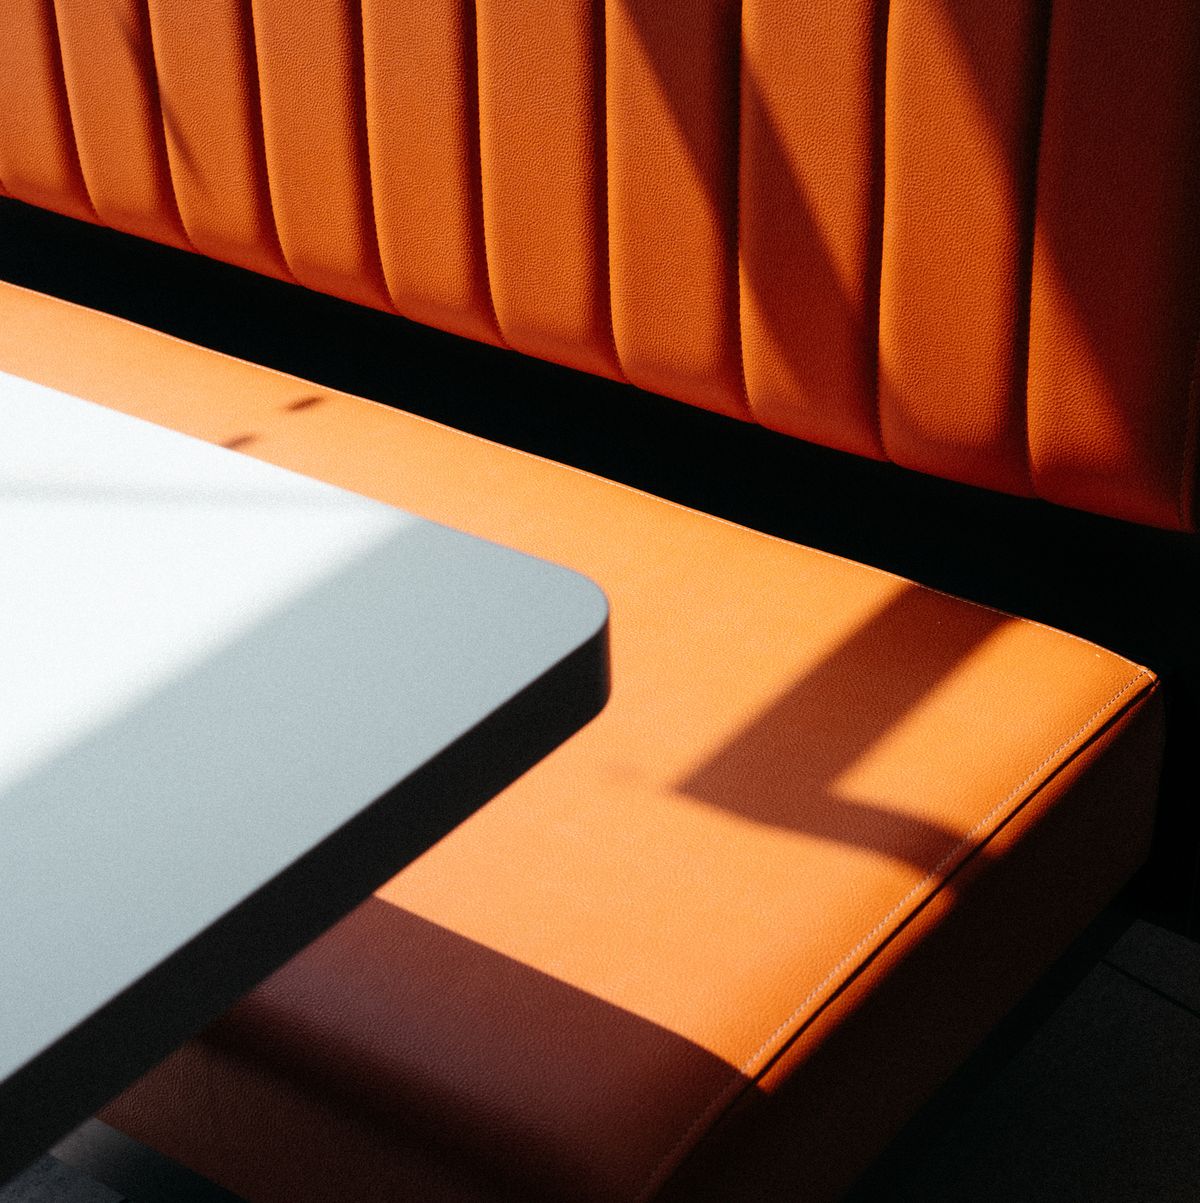 close up view of the seat and table in a restaurant